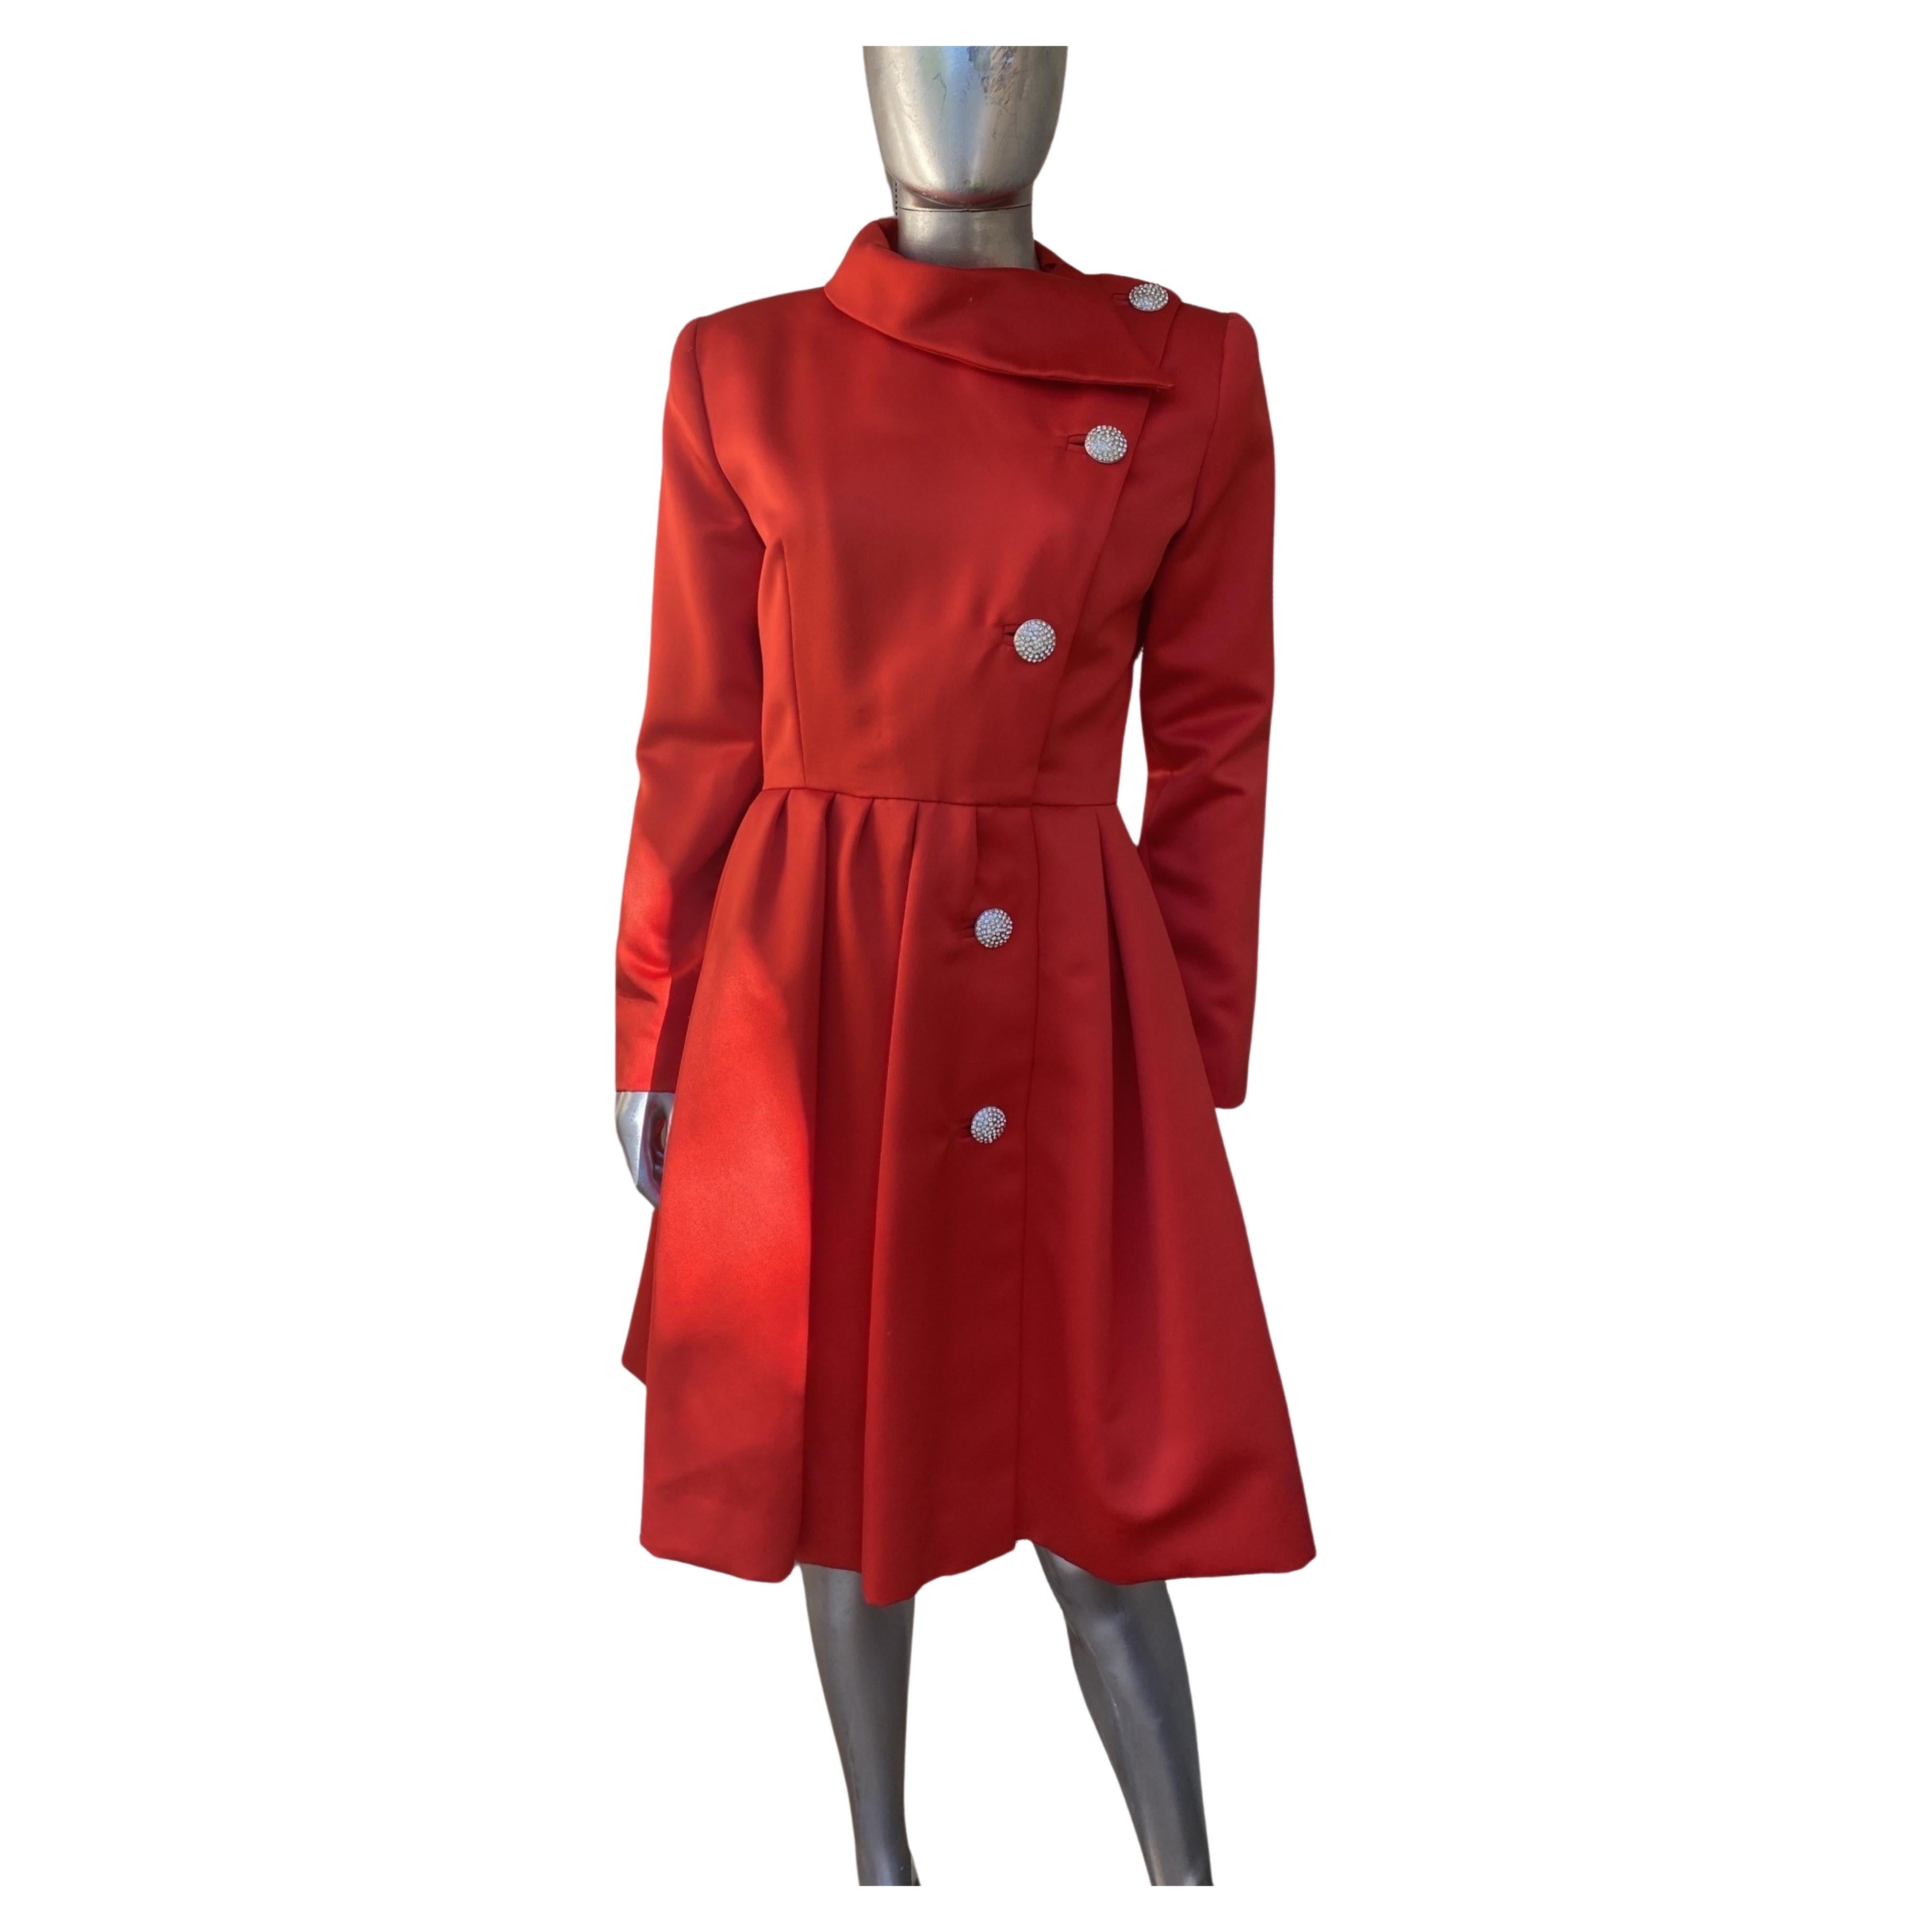 Red Satin and Rhinestone Button Coat Dress by Victor Costa Neiman Marcus Size 8 In Good Condition For Sale In Palm Springs, CA